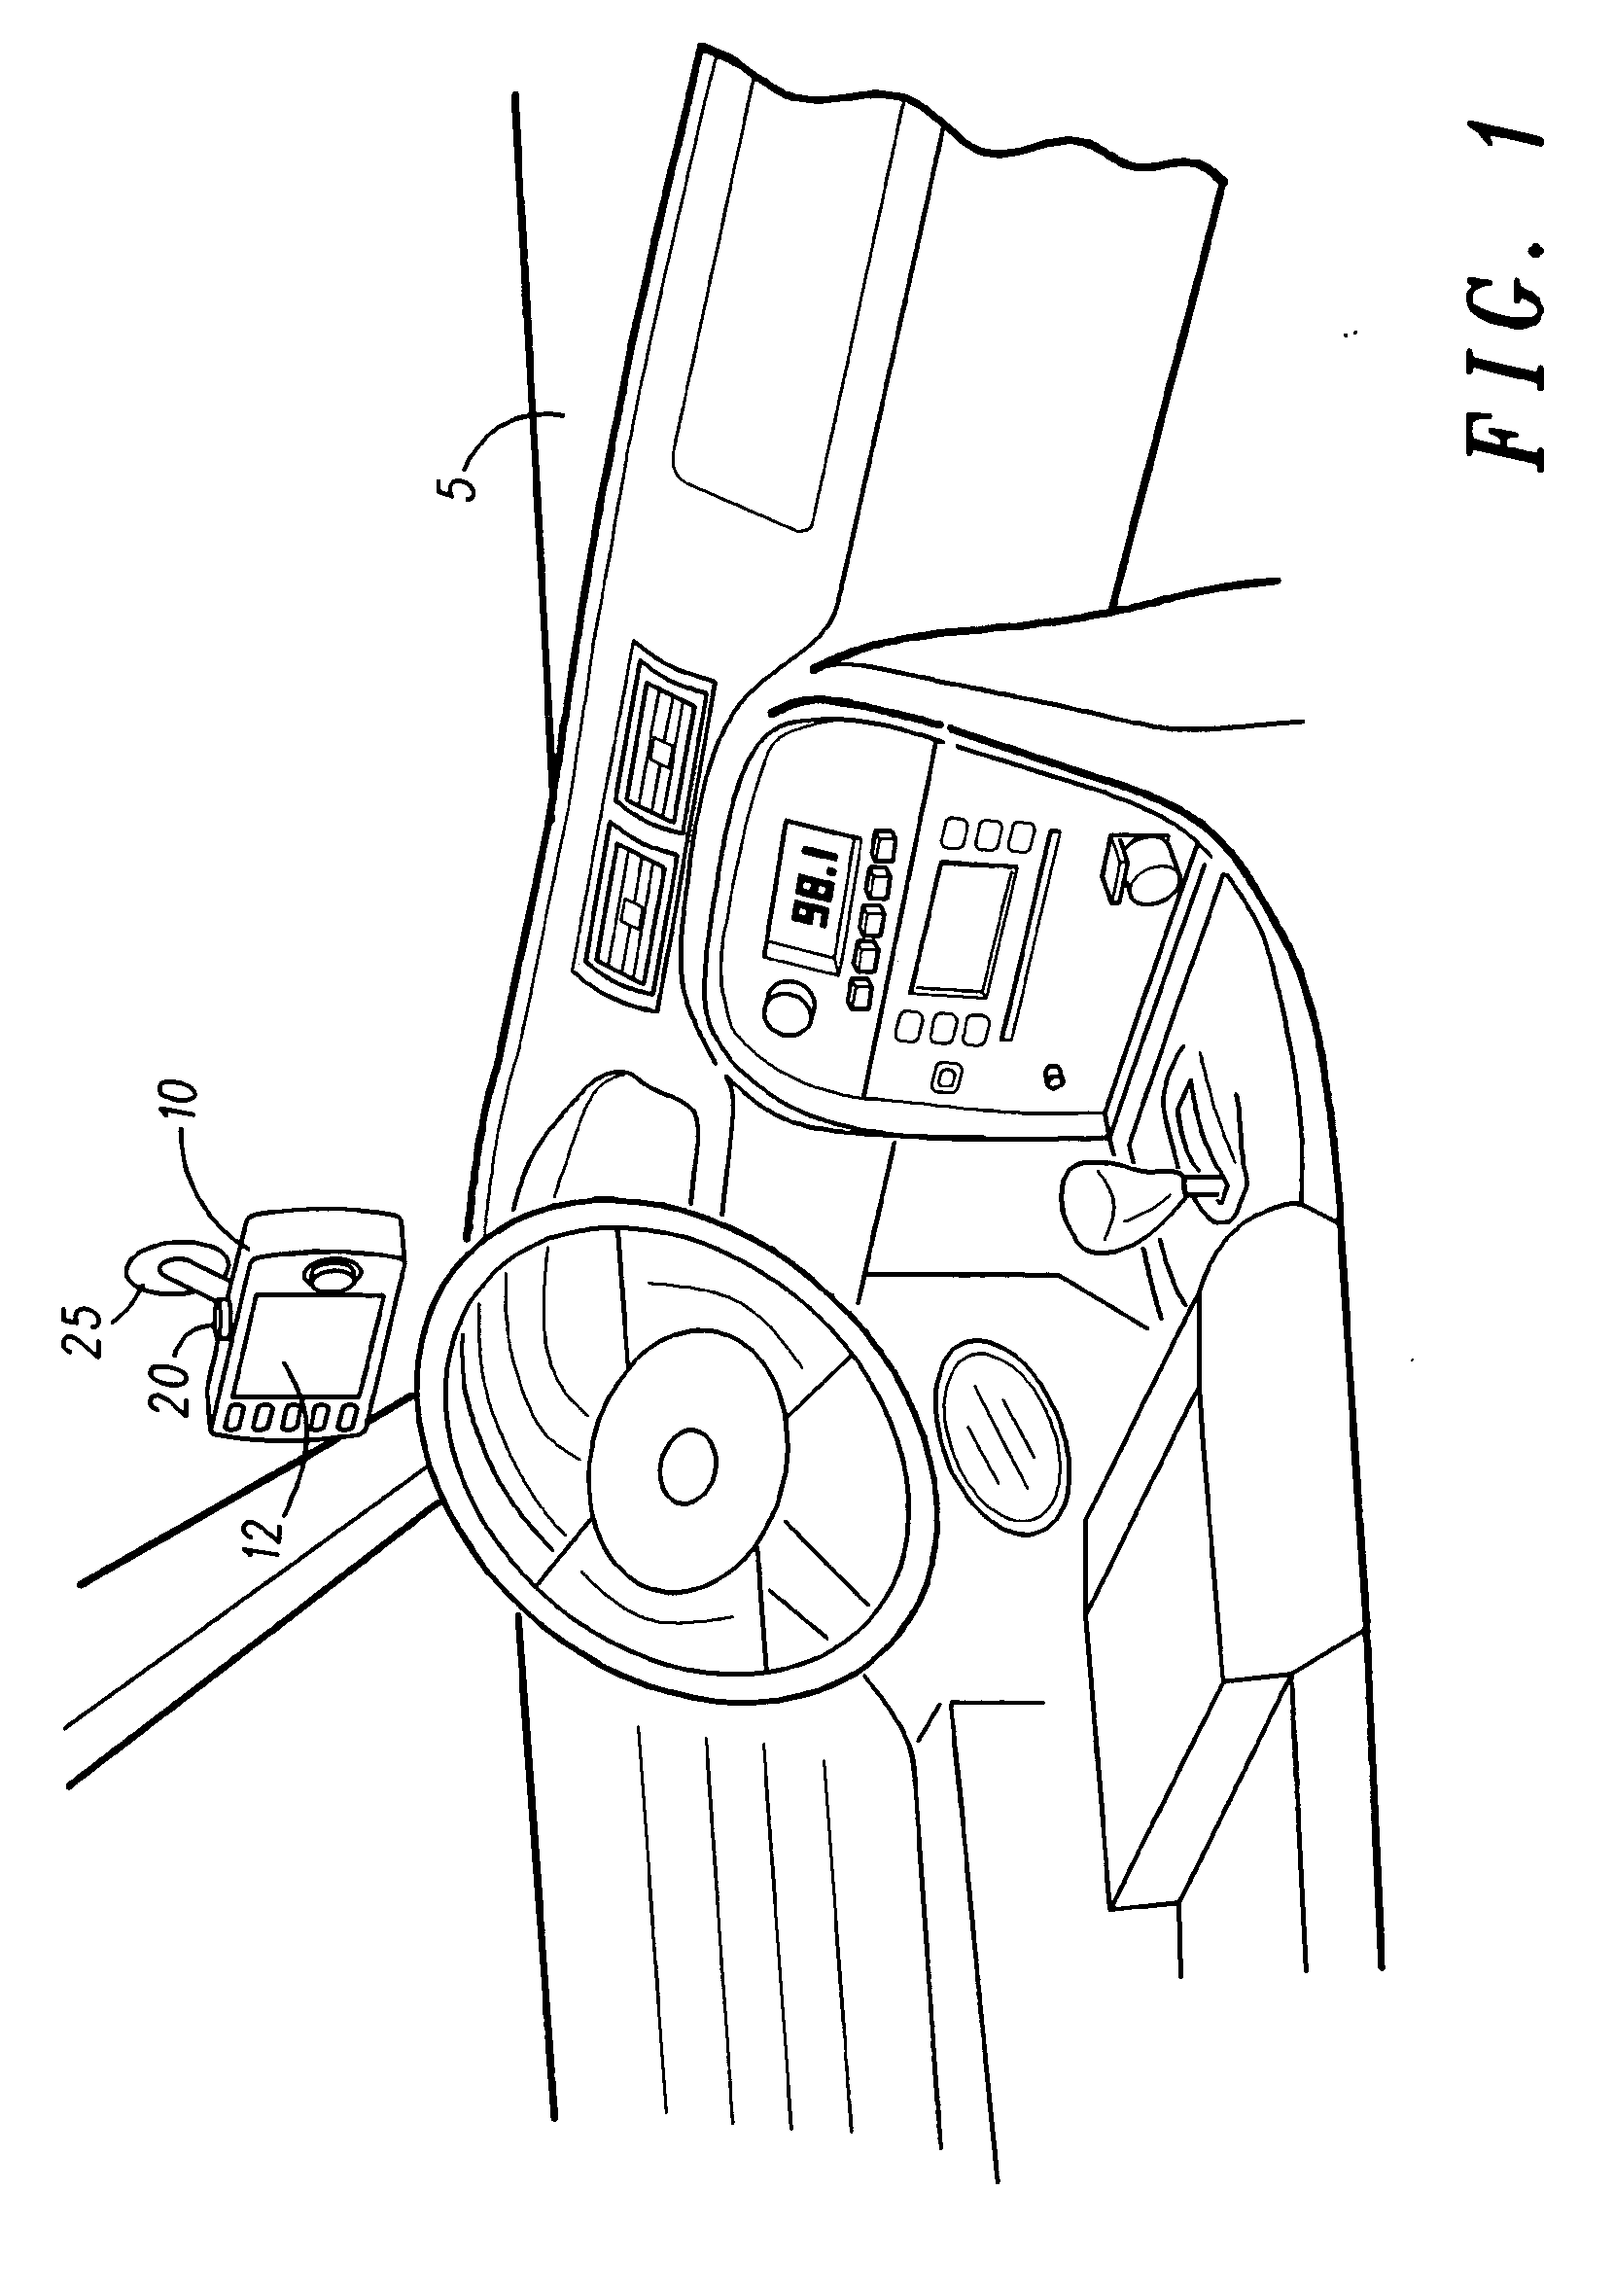 Method and device for determining a location and orientation of a device in a vehicle